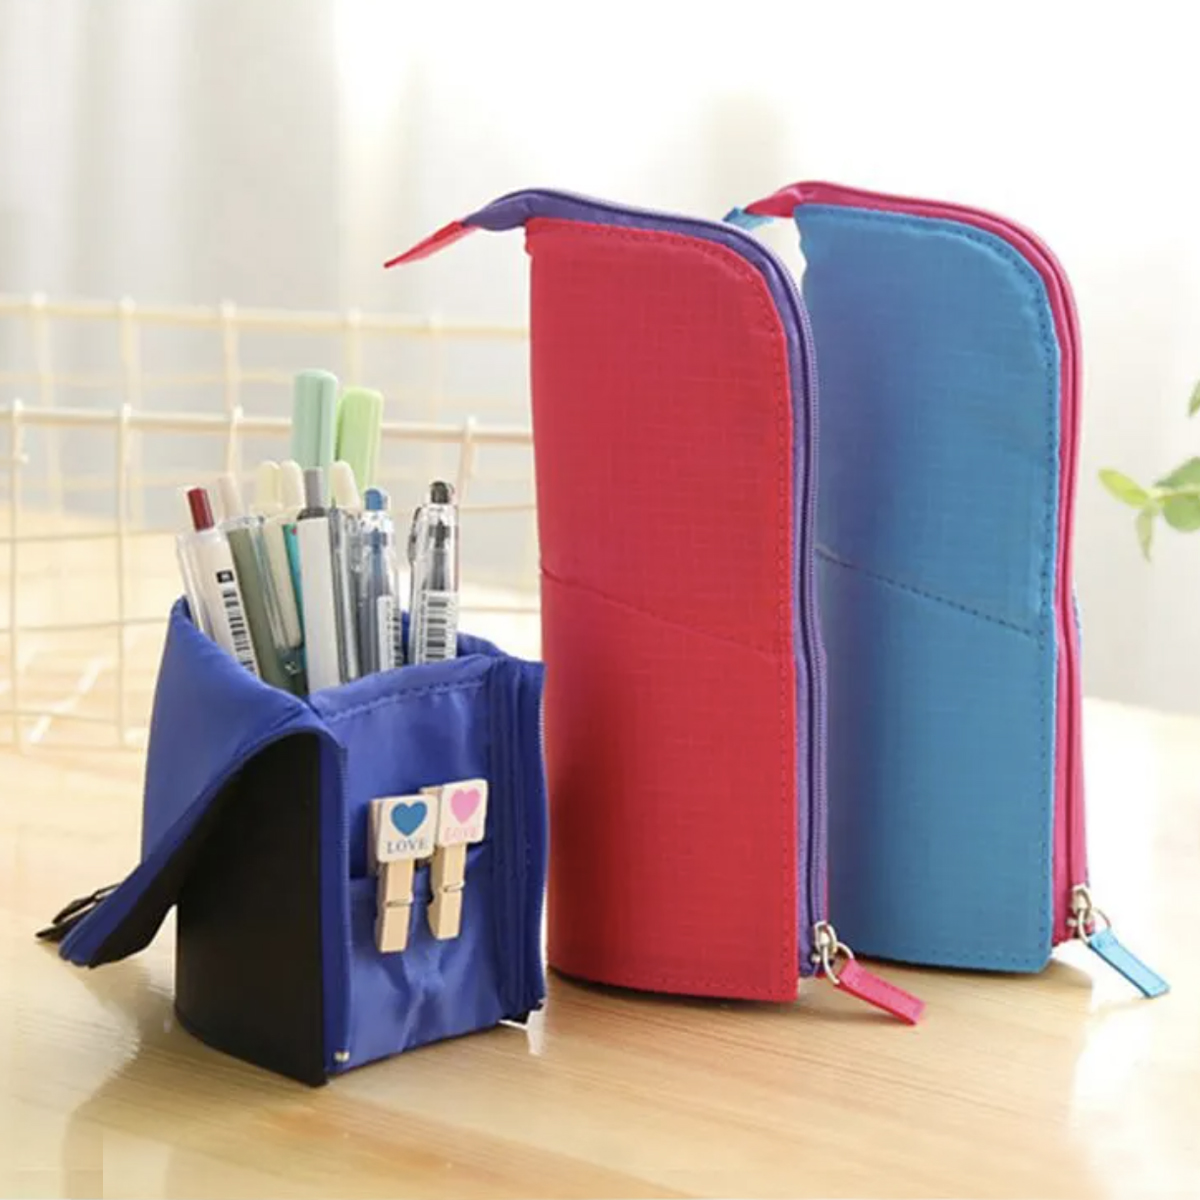 2-in-1 Multi-function Pencil Pouch